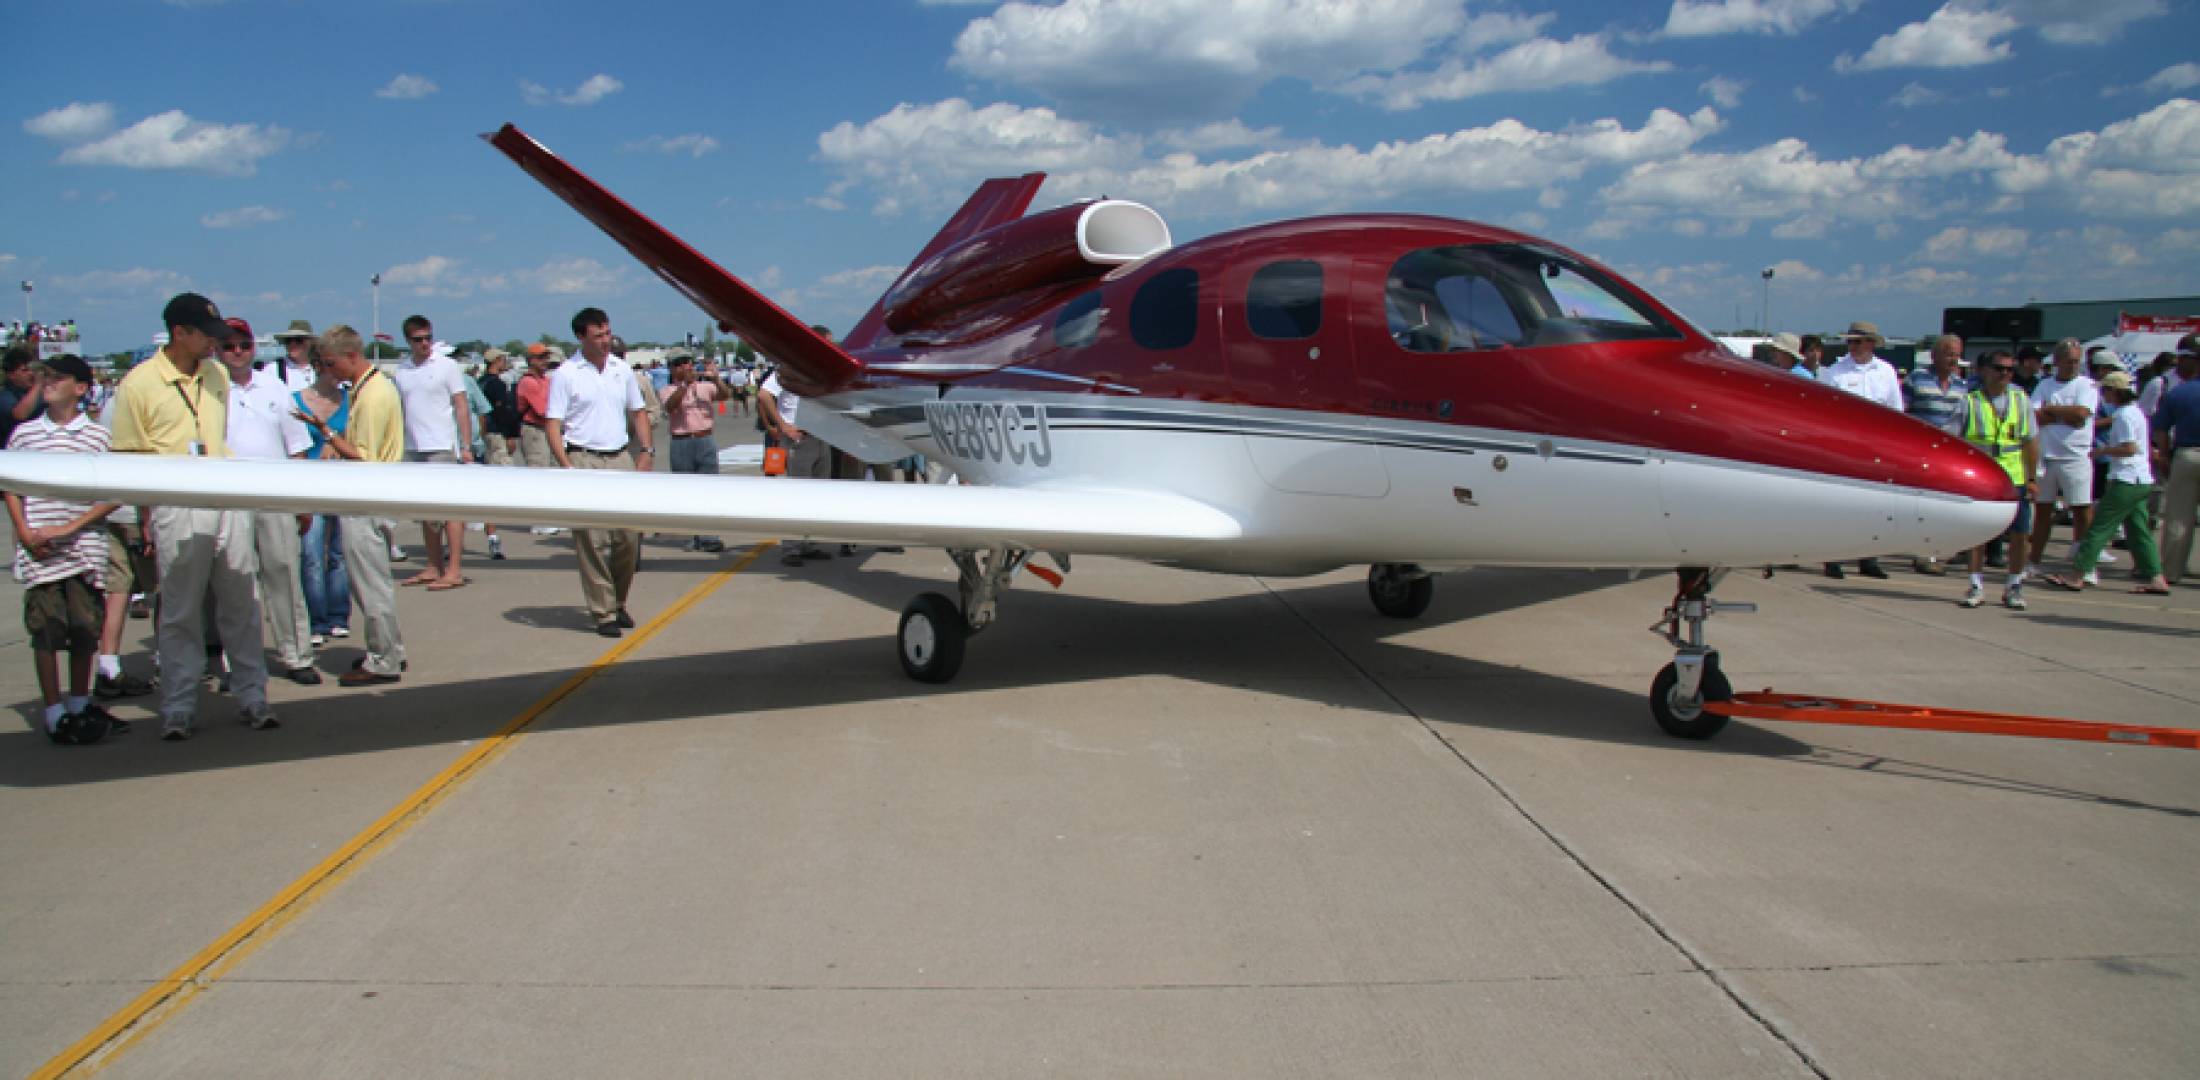 First Conforming Cirrus Vision Jet To Fly in 2014 | Business ...